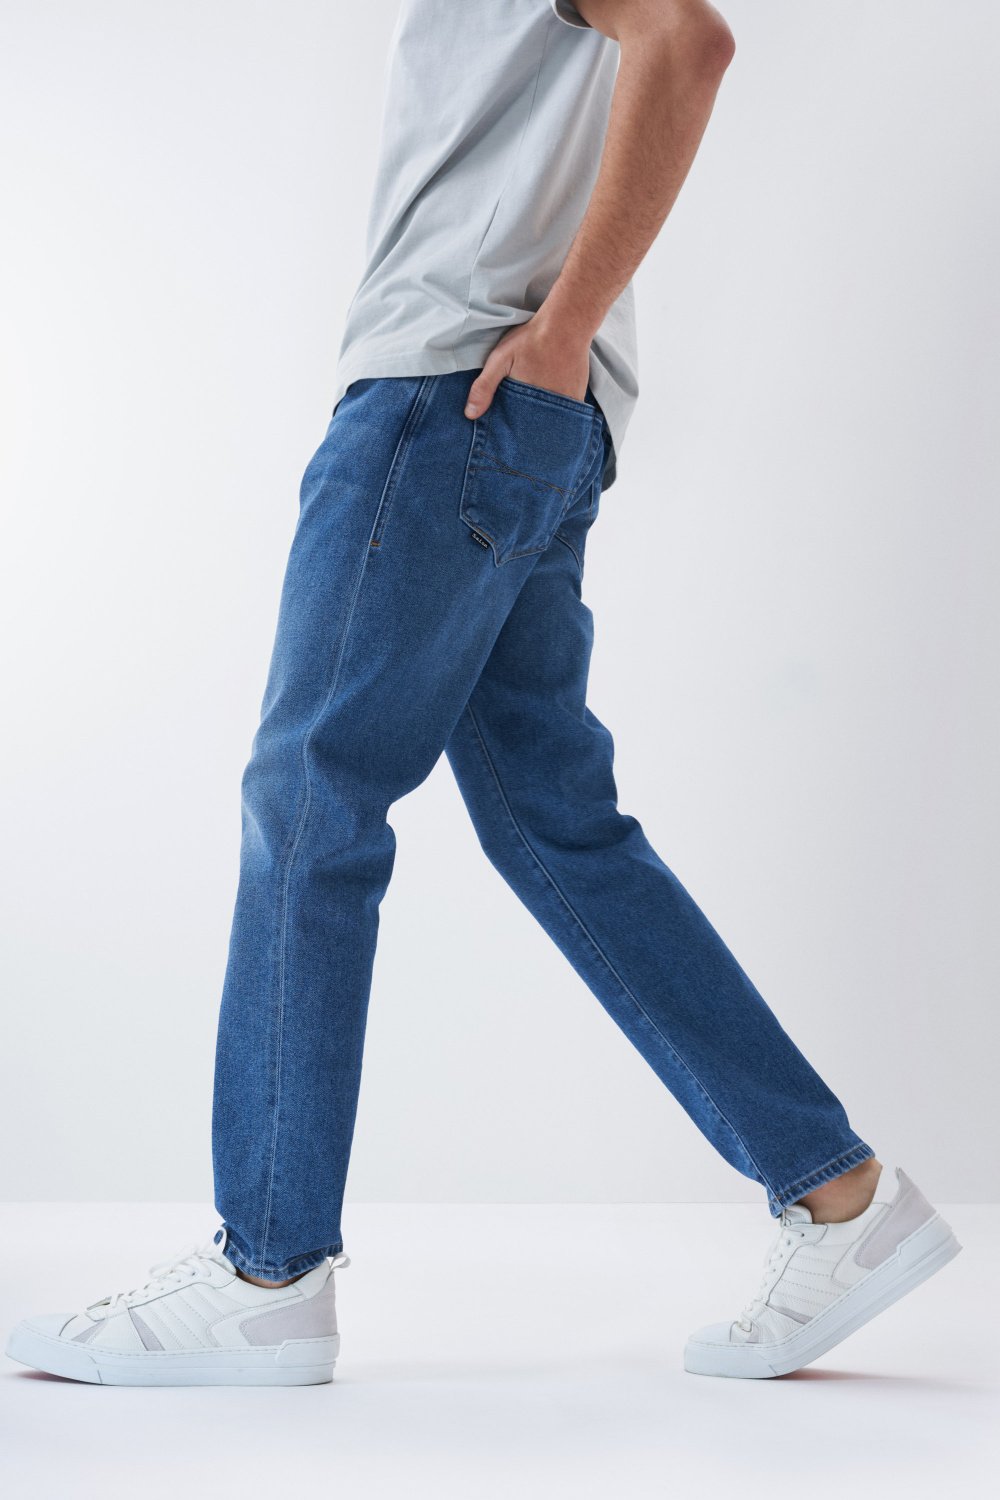 Vintage Tapered-Jeans, S-Repel, mittlere Frbung - Salsa